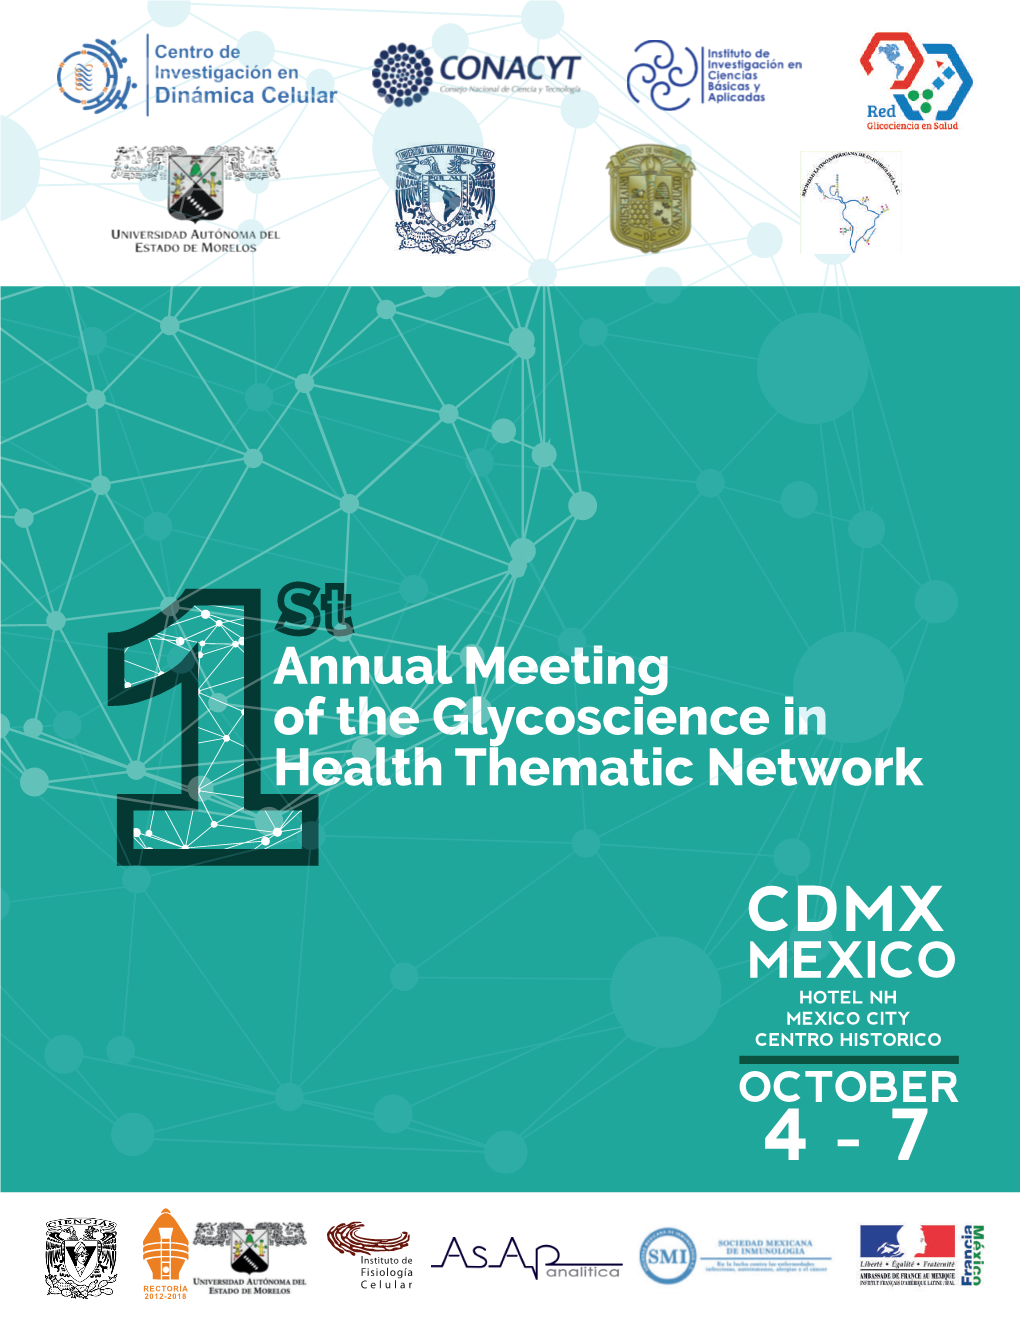 Annual Meeting of the Glycoscience in Health Thematic Network